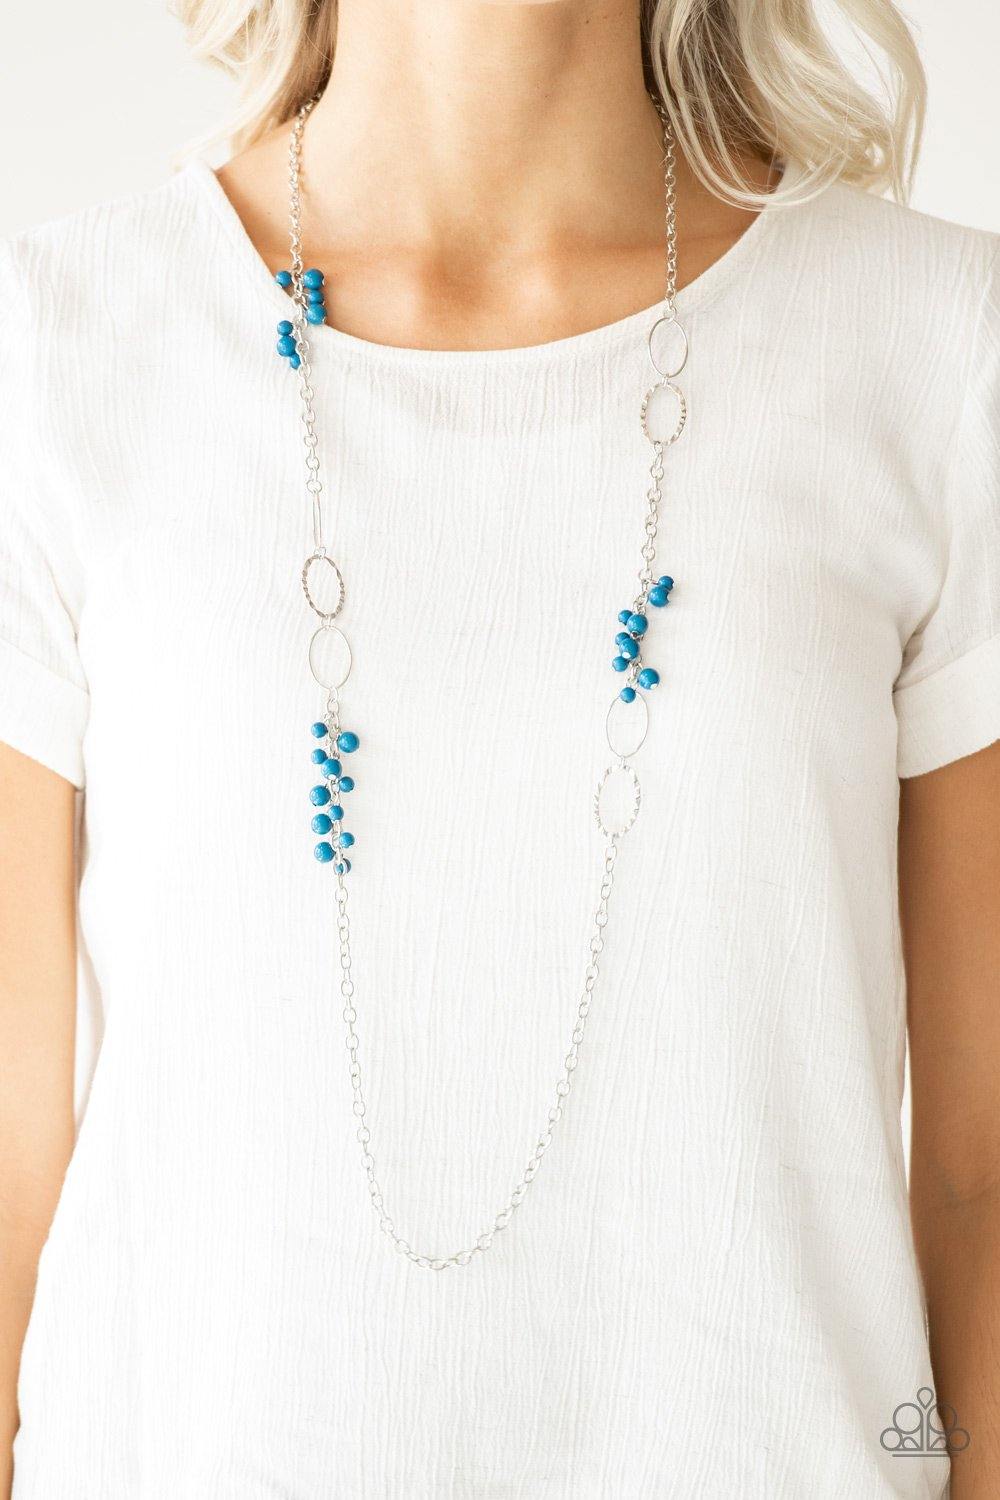 Flirty Foxtrot - Blue Necklace - Paparazzi Accessories - Sassysblingandthings